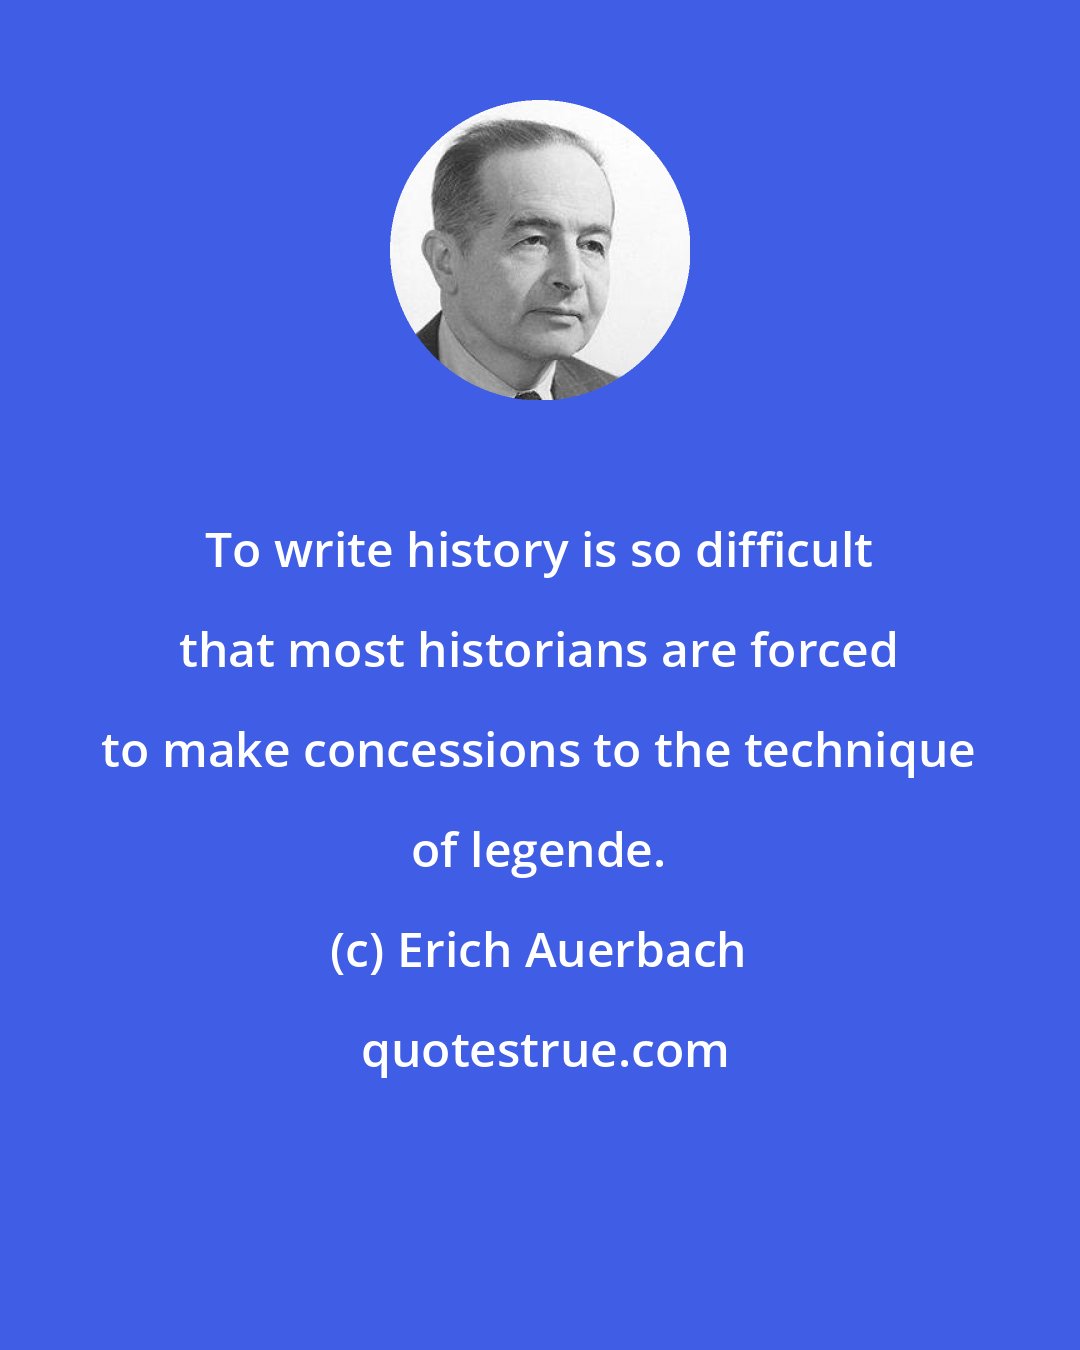 Erich Auerbach: To write history is so difficult that most historians are forced to make concessions to the technique of legende.